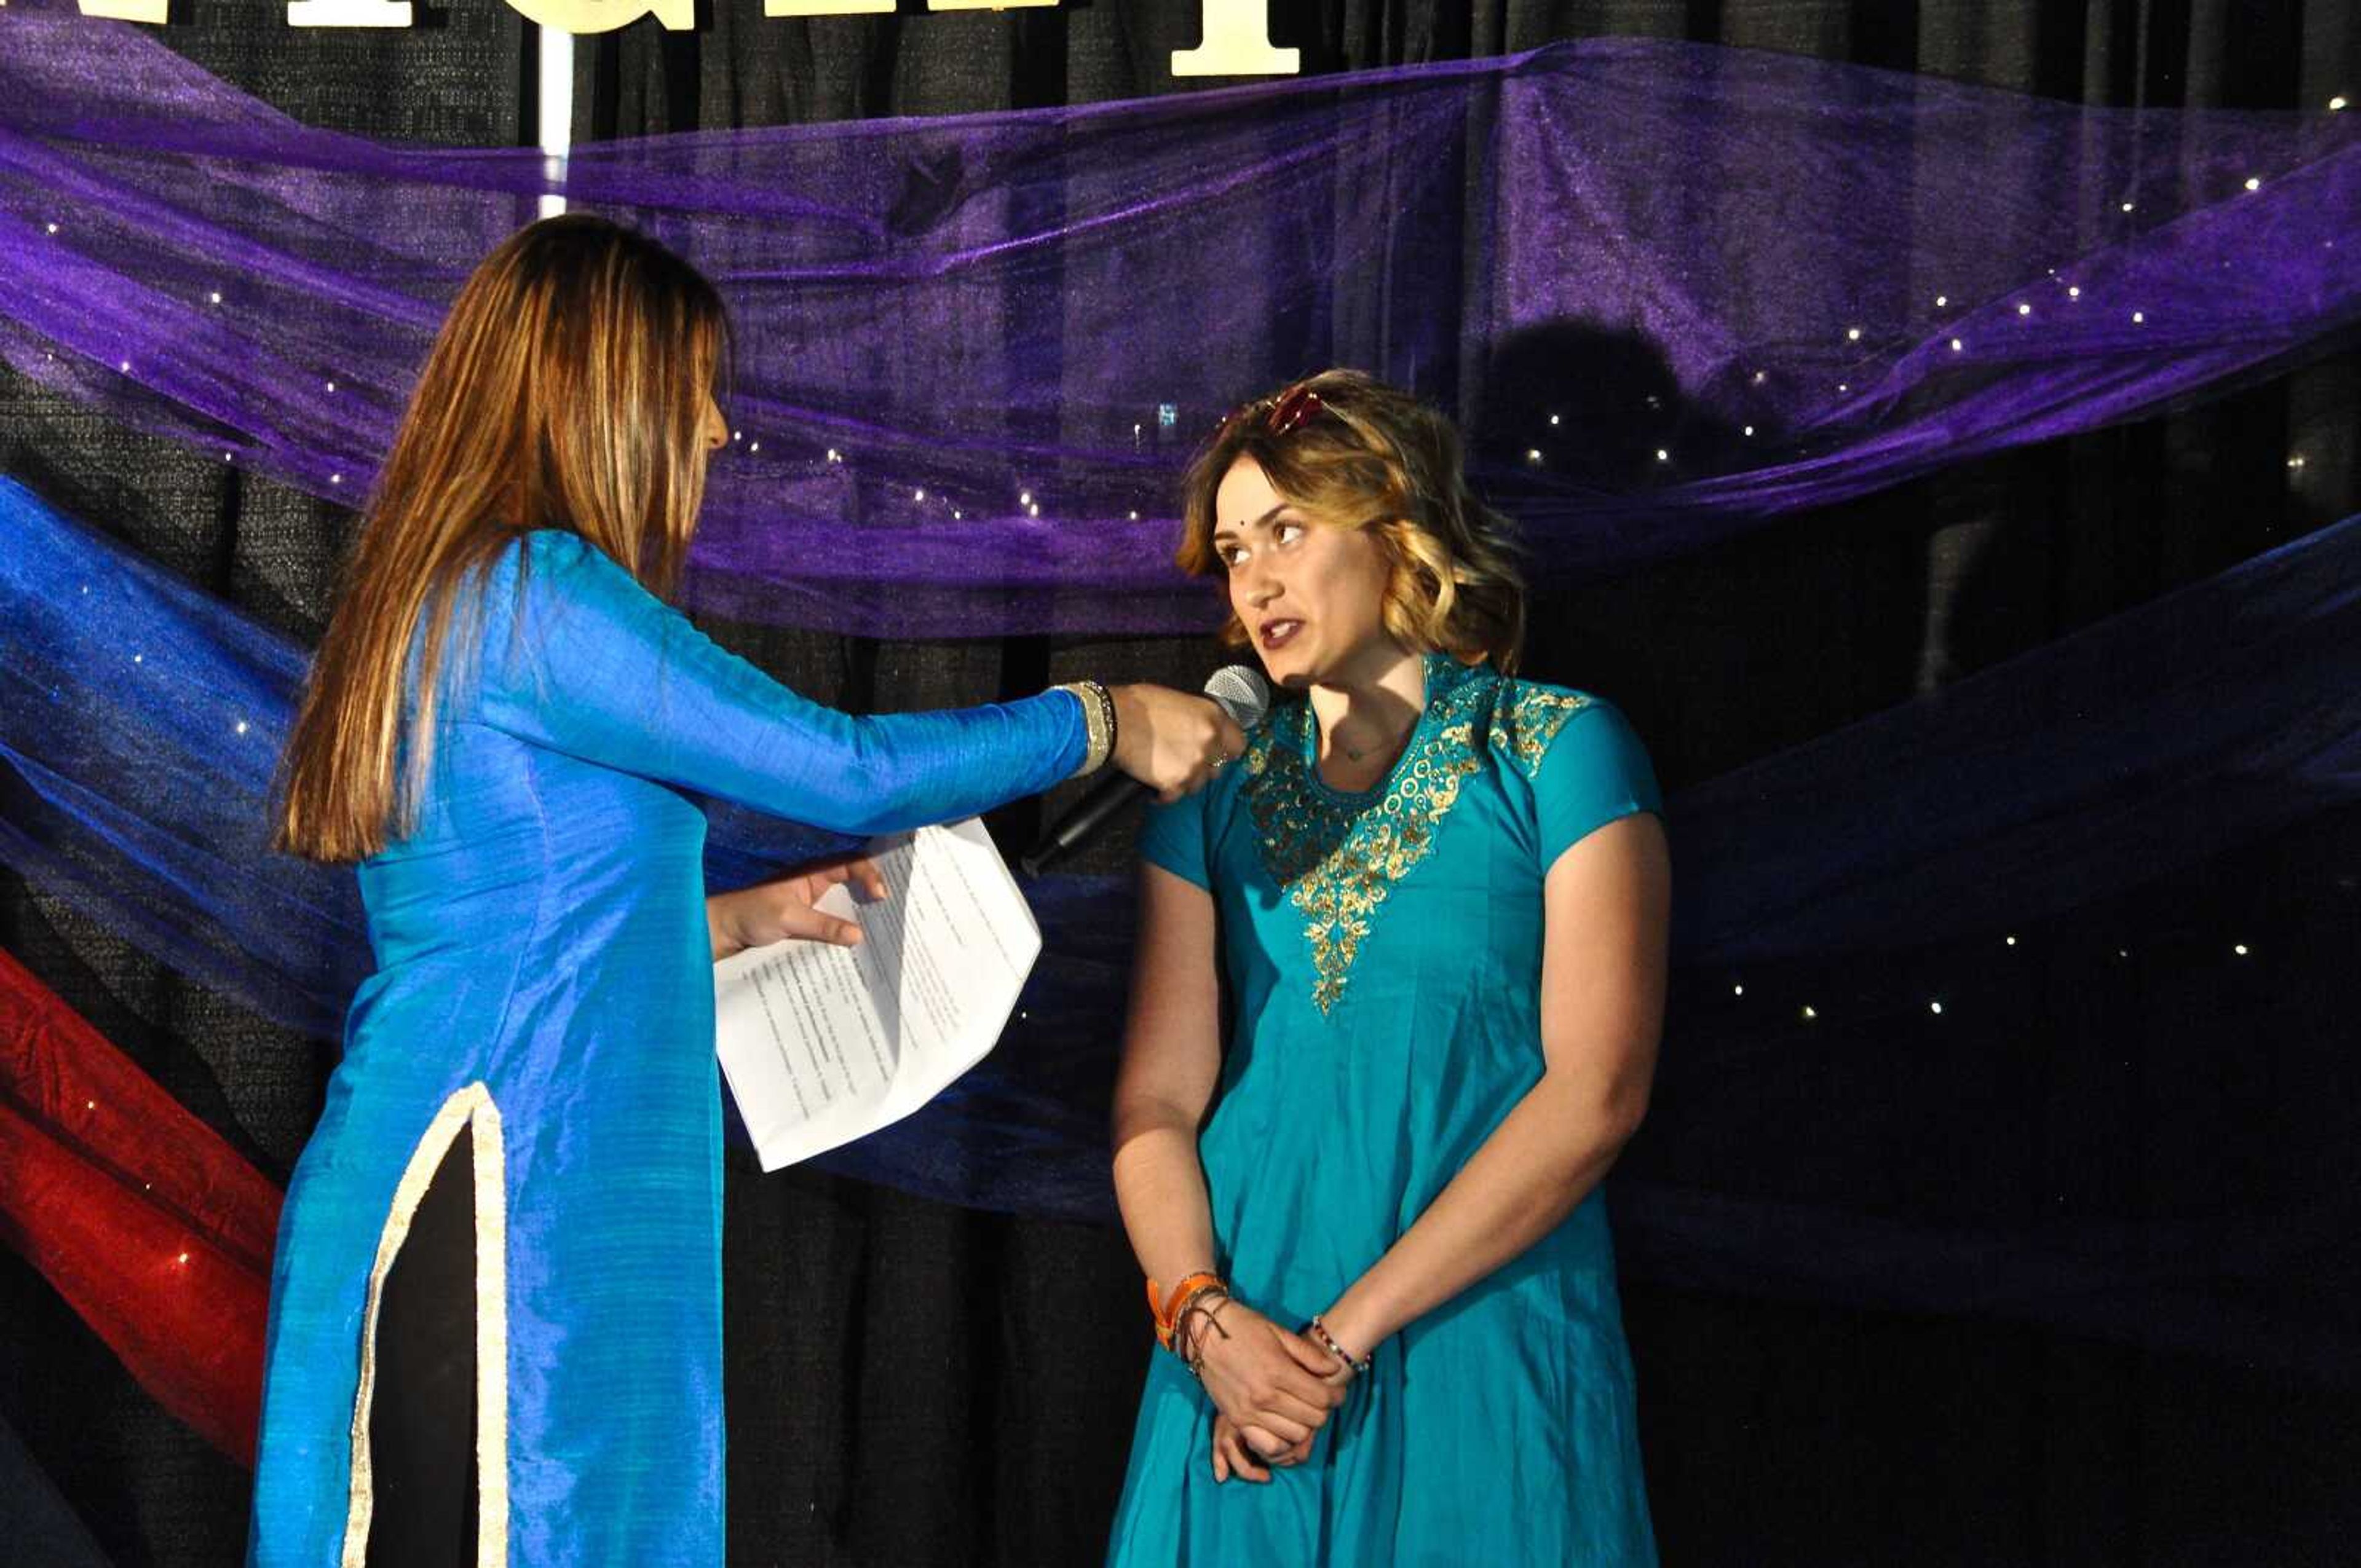 Southeast student Lexi Roelling speaks with Ruchika Sa, president of the International Student Association at Indian Night on March 23.